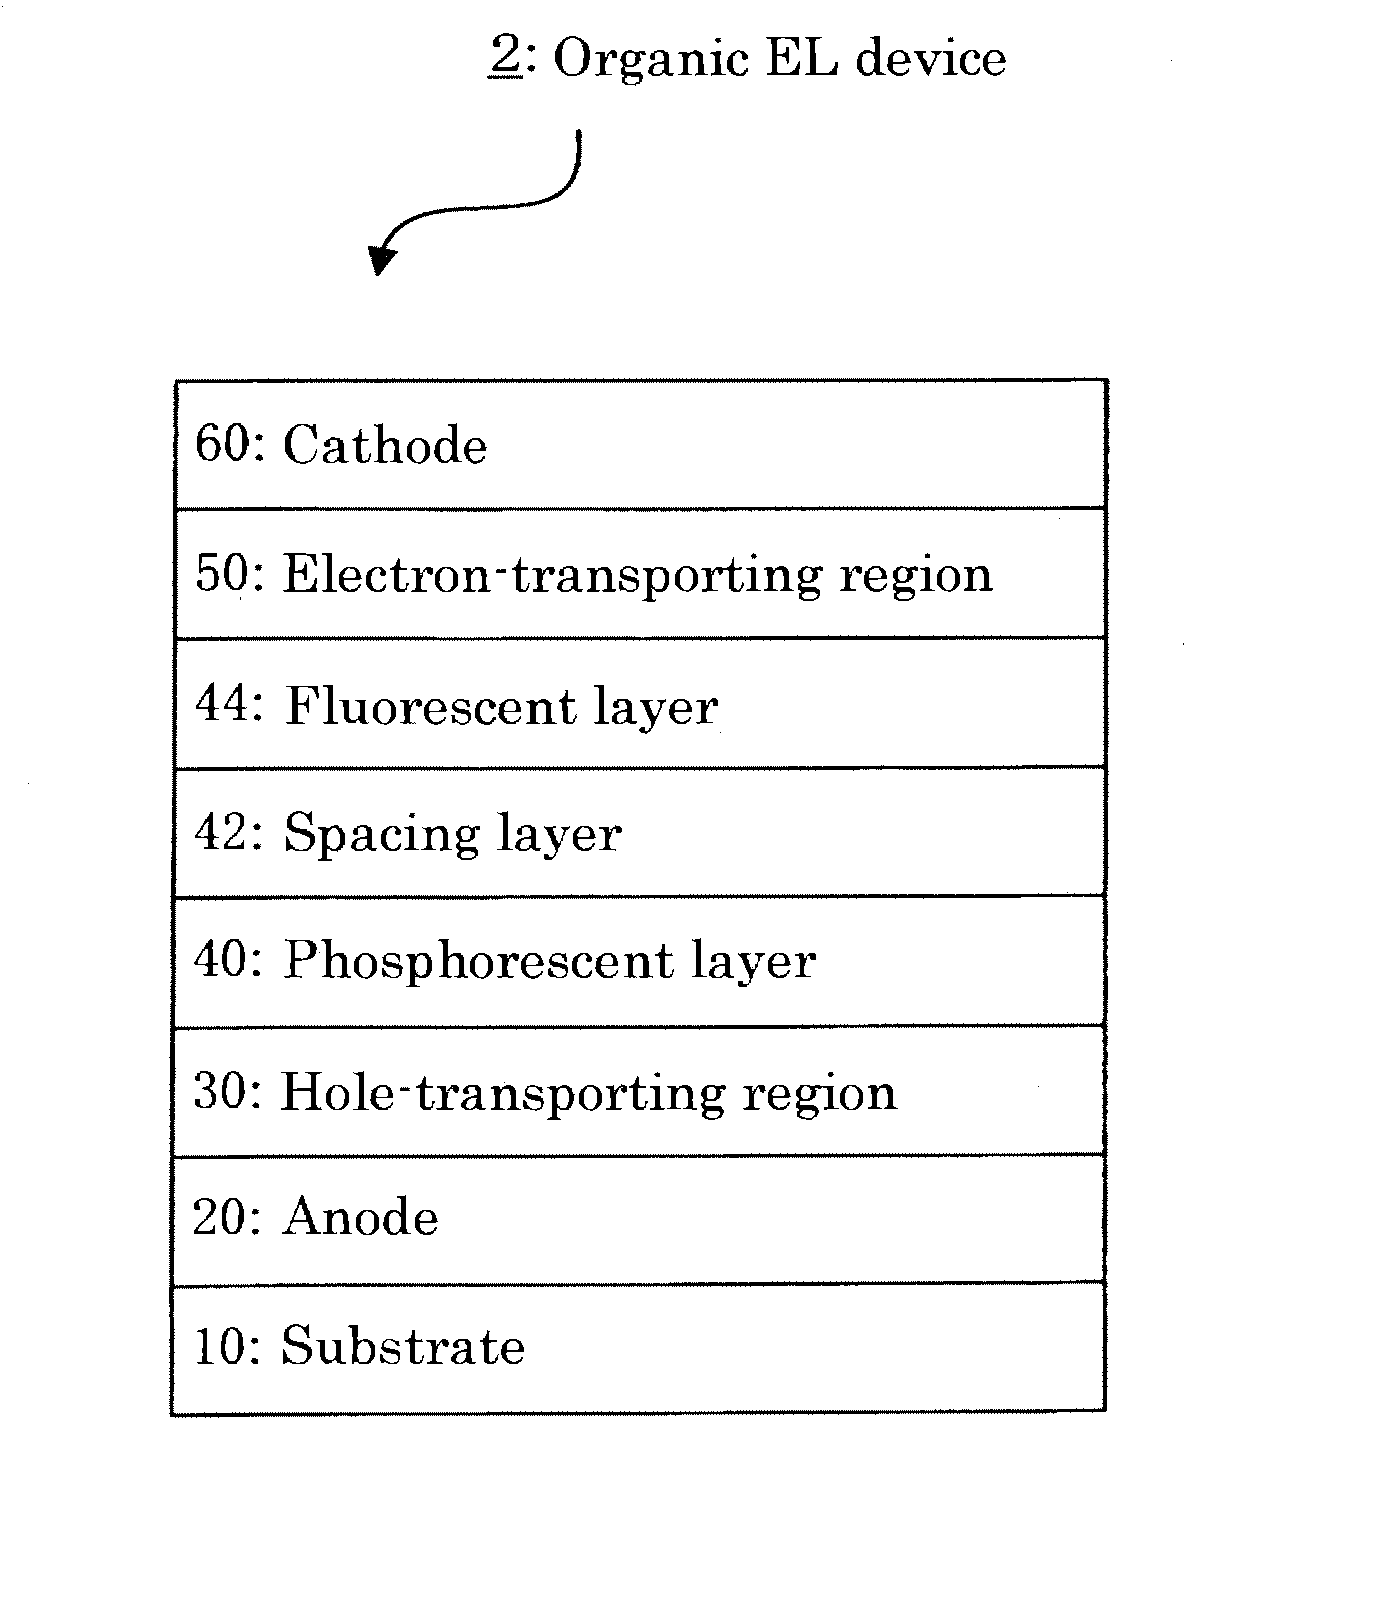 Material for organic electroluminescent element, and organic electroluminescent element produced using same